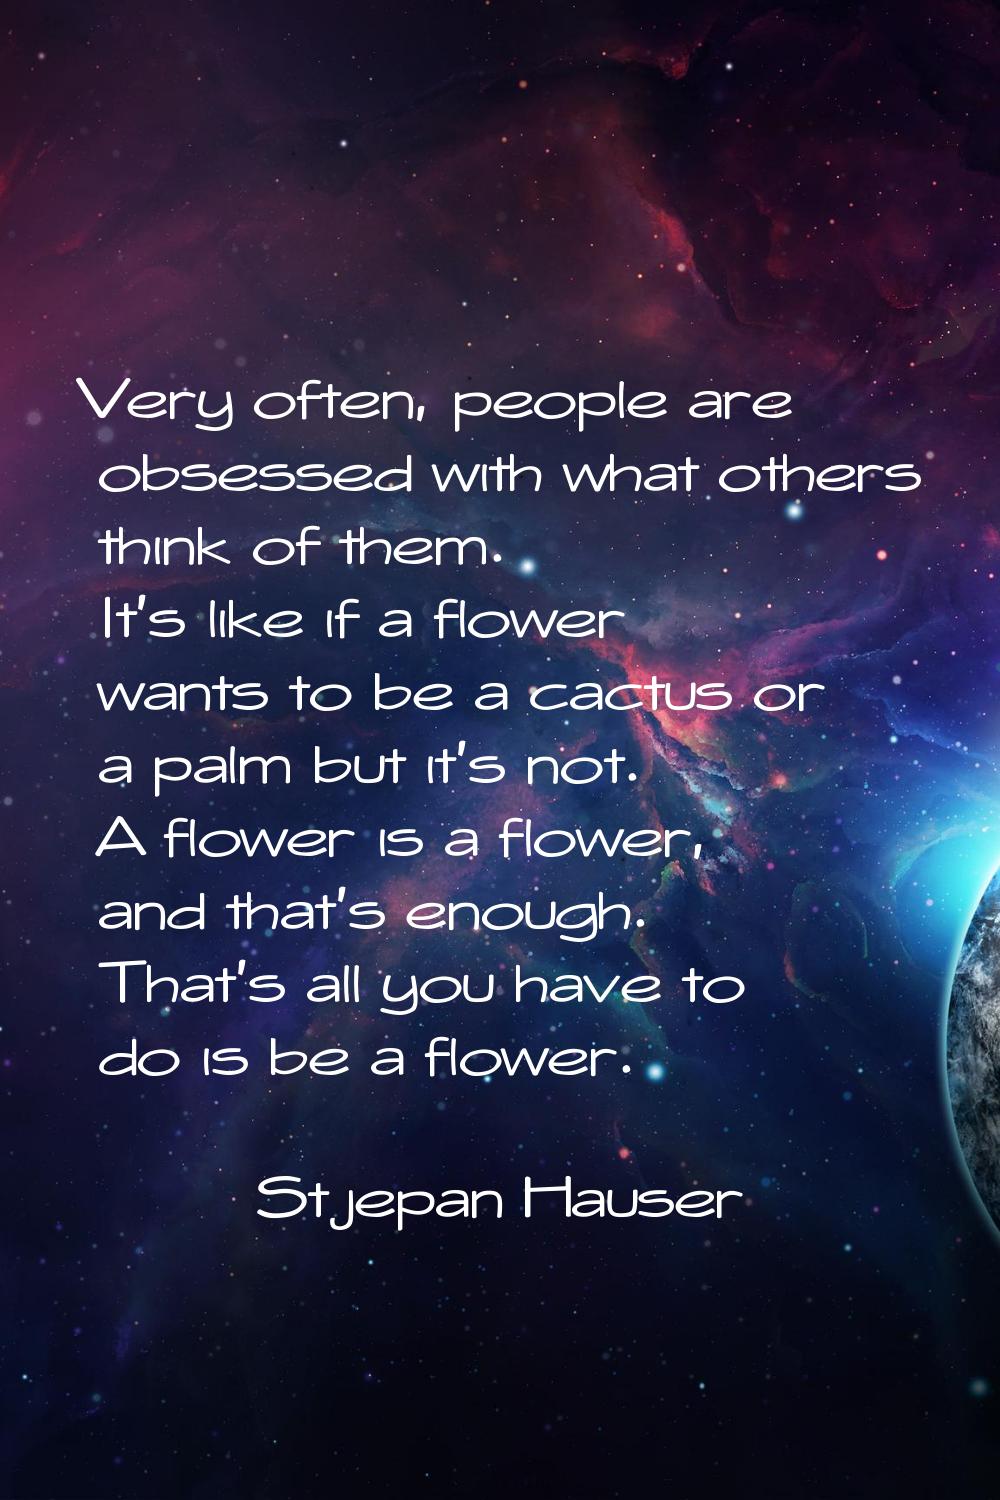 Very often, people are obsessed with what others think of them. It's like if a flower wants to be a